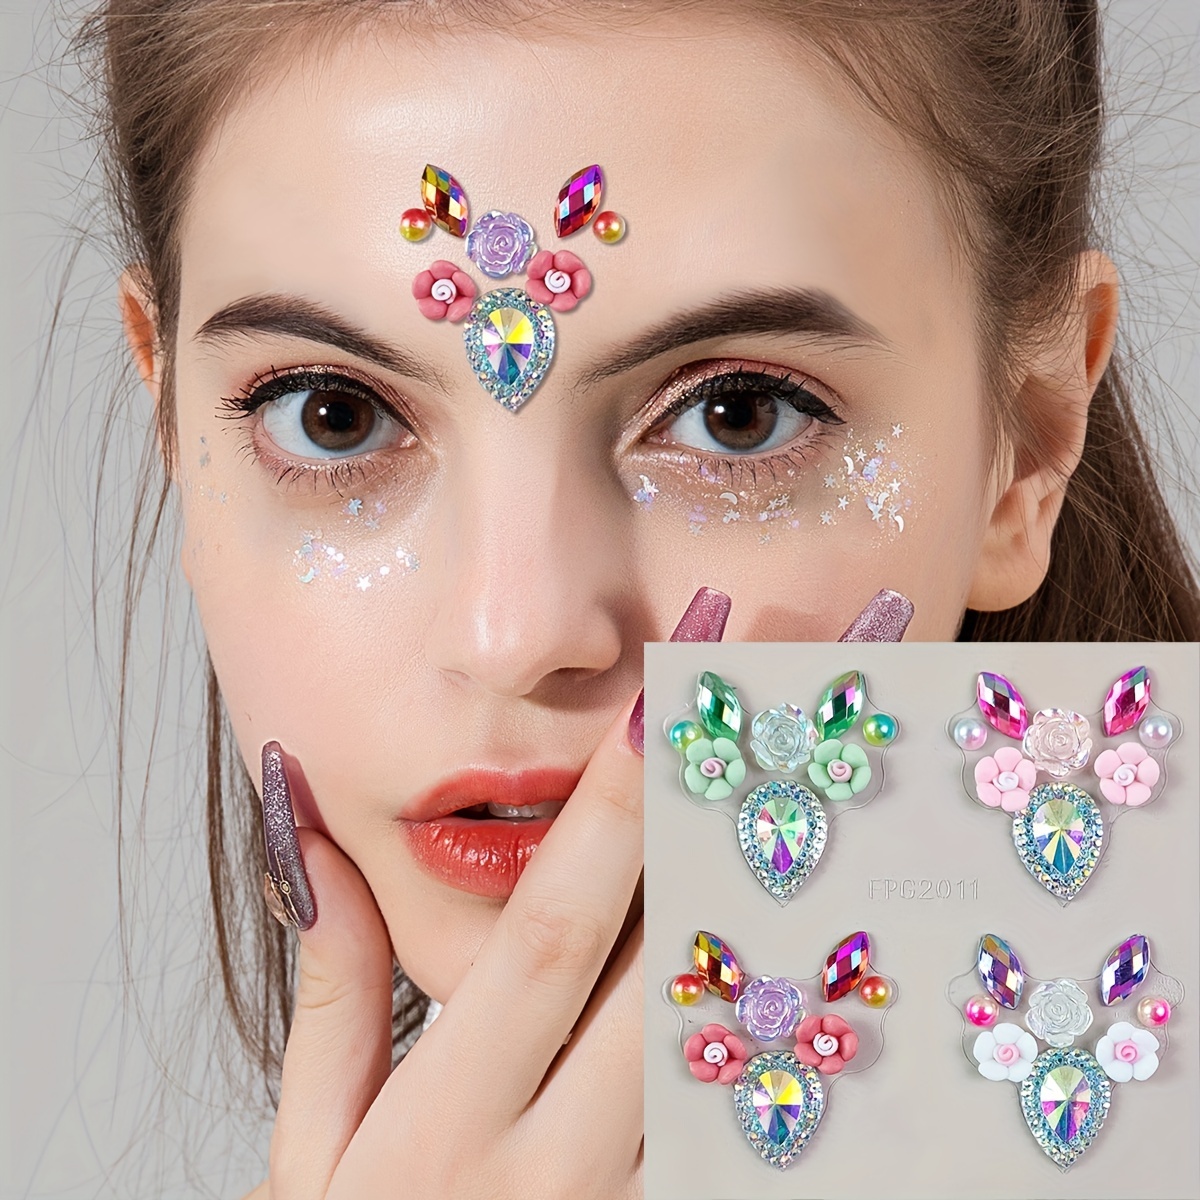  Face Jewels by Moon Glitter - Festival Face Body Gems, Crystal  Make up Eye Glitter Stickers, Temporary Tattoo Jewels (Sunset Goddess) :  Beauty & Personal Care